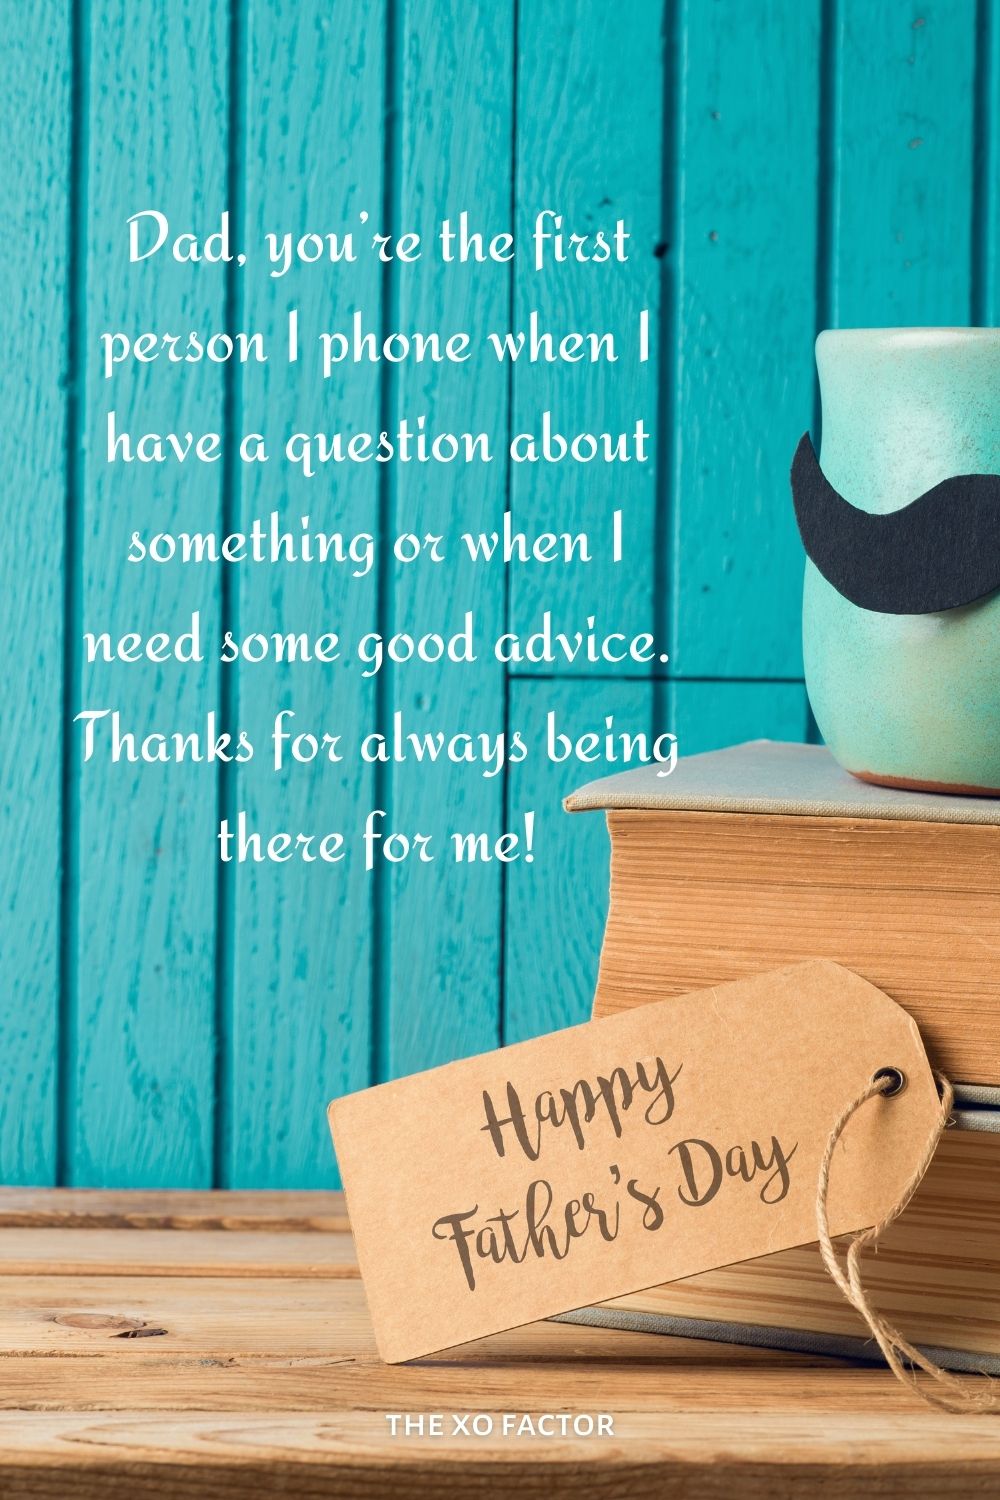 Dad, you’re the first person I phone when I have a question about something or when I need some good advice. Thanks for always being there for me!